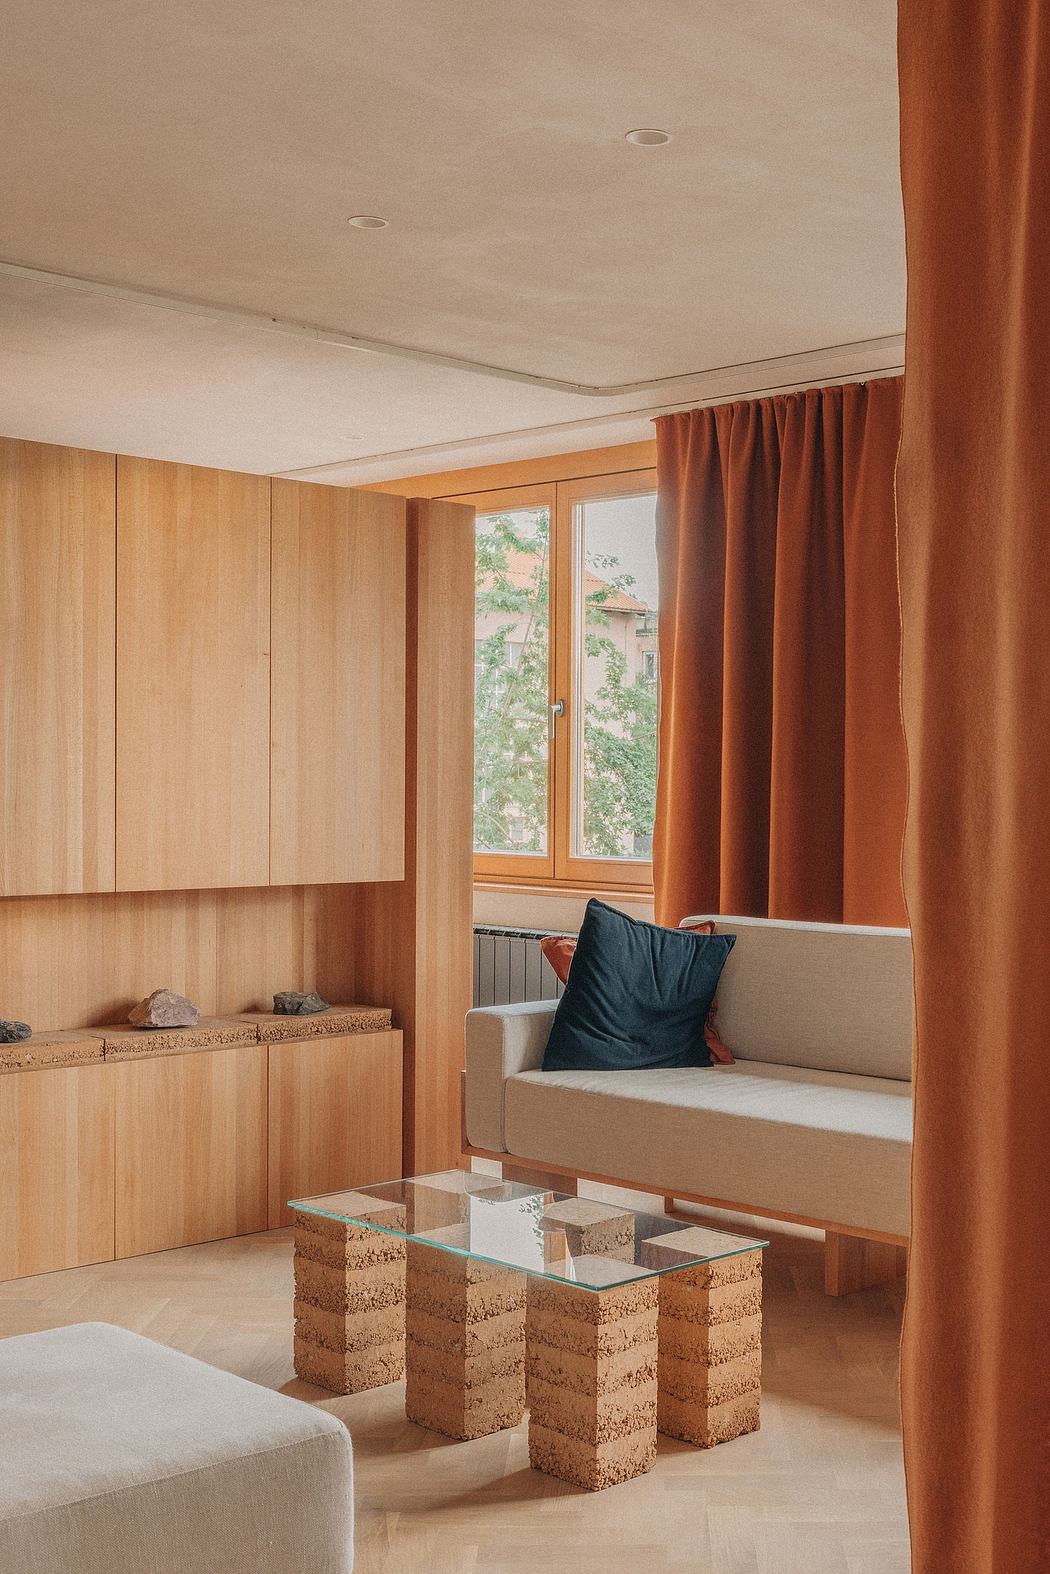 Cozy wooden interior with floor-to-ceiling windows, curtains, and a modern coffee table.